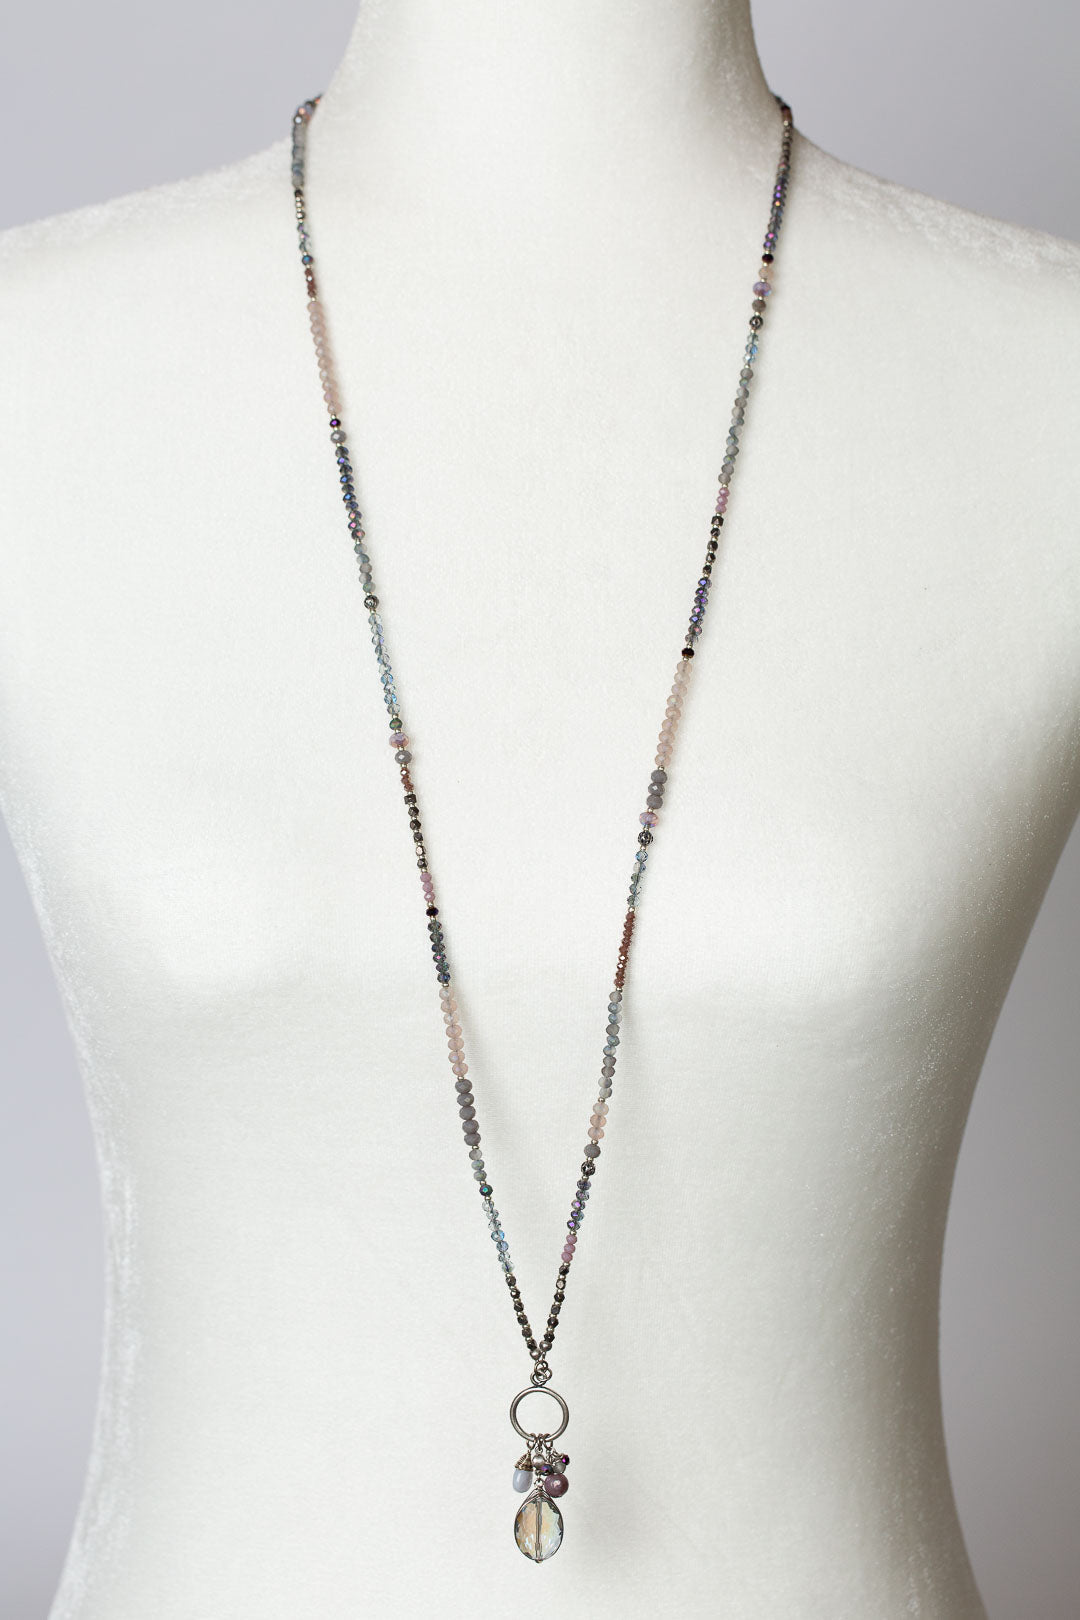 Reflections 20.75" or 38.5" Convertible Tassel Necklace